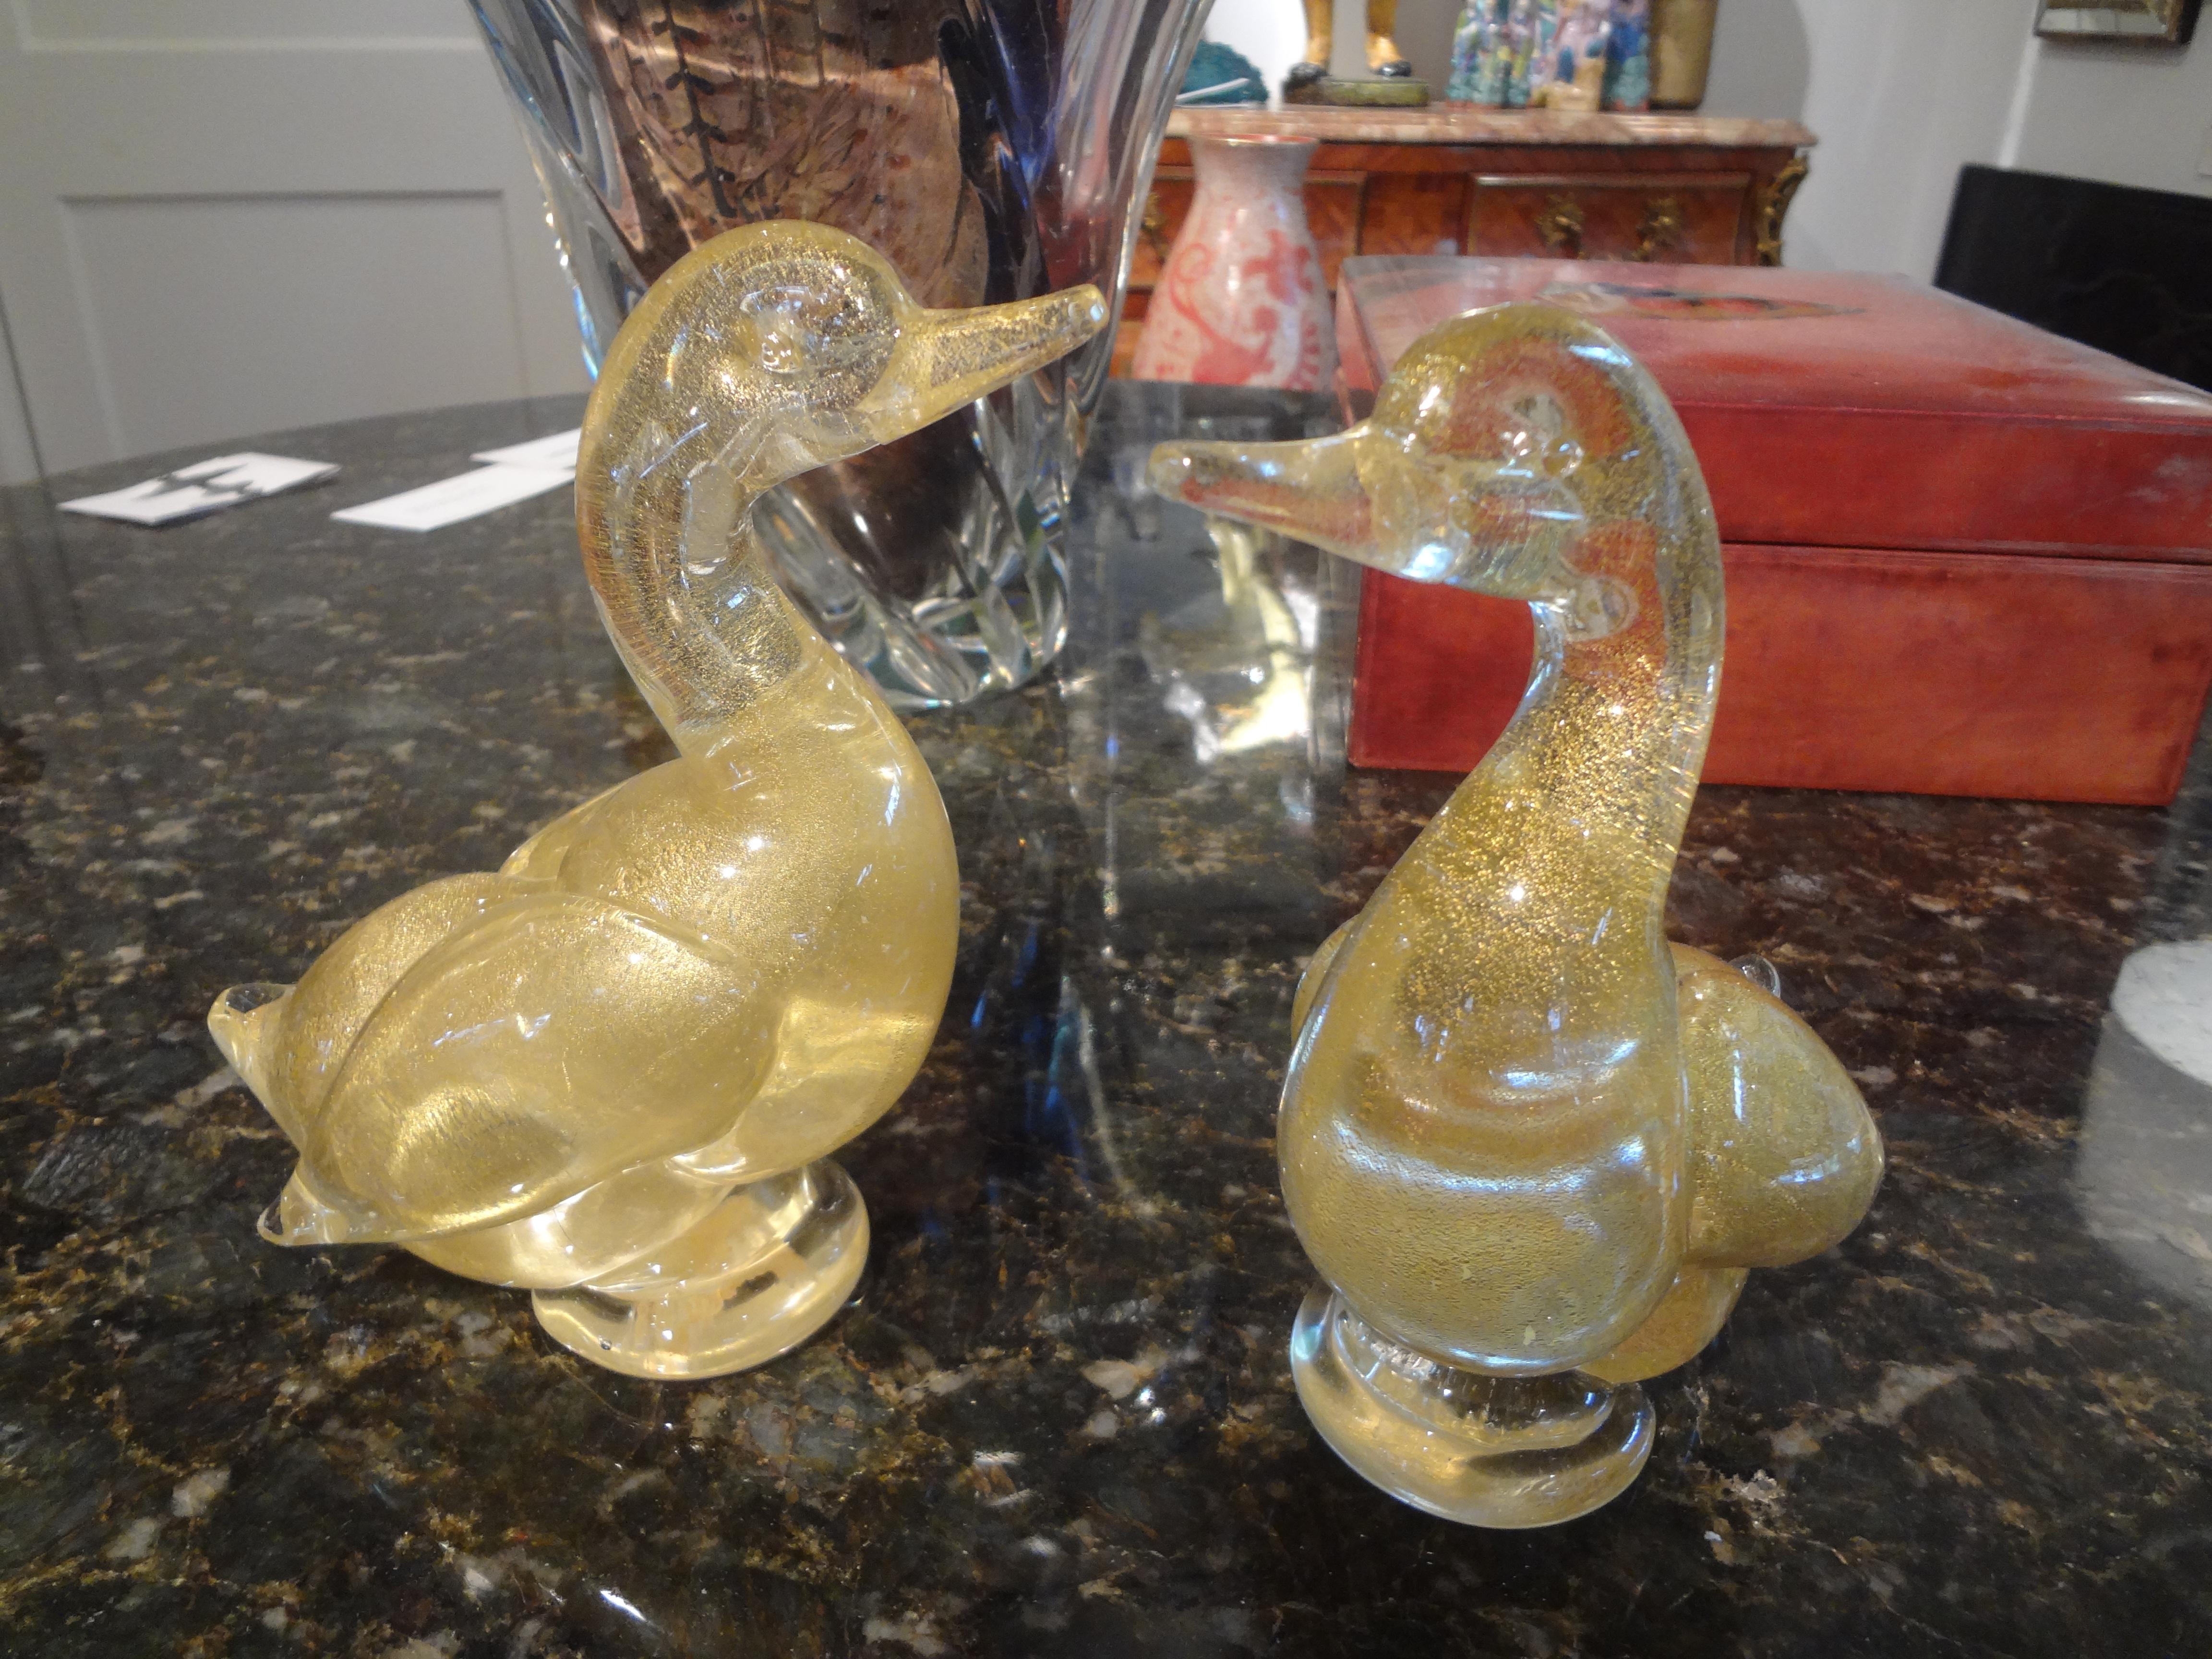 Pair of Murano glass ducks by Fratelli.
Beautiful pair of gold murano glass ducks by Fratelli. This lovely pair of murano glass ducks are a gold glass loaded with beautiful gold flecks. This pair of ducks retain what's left of the original label,